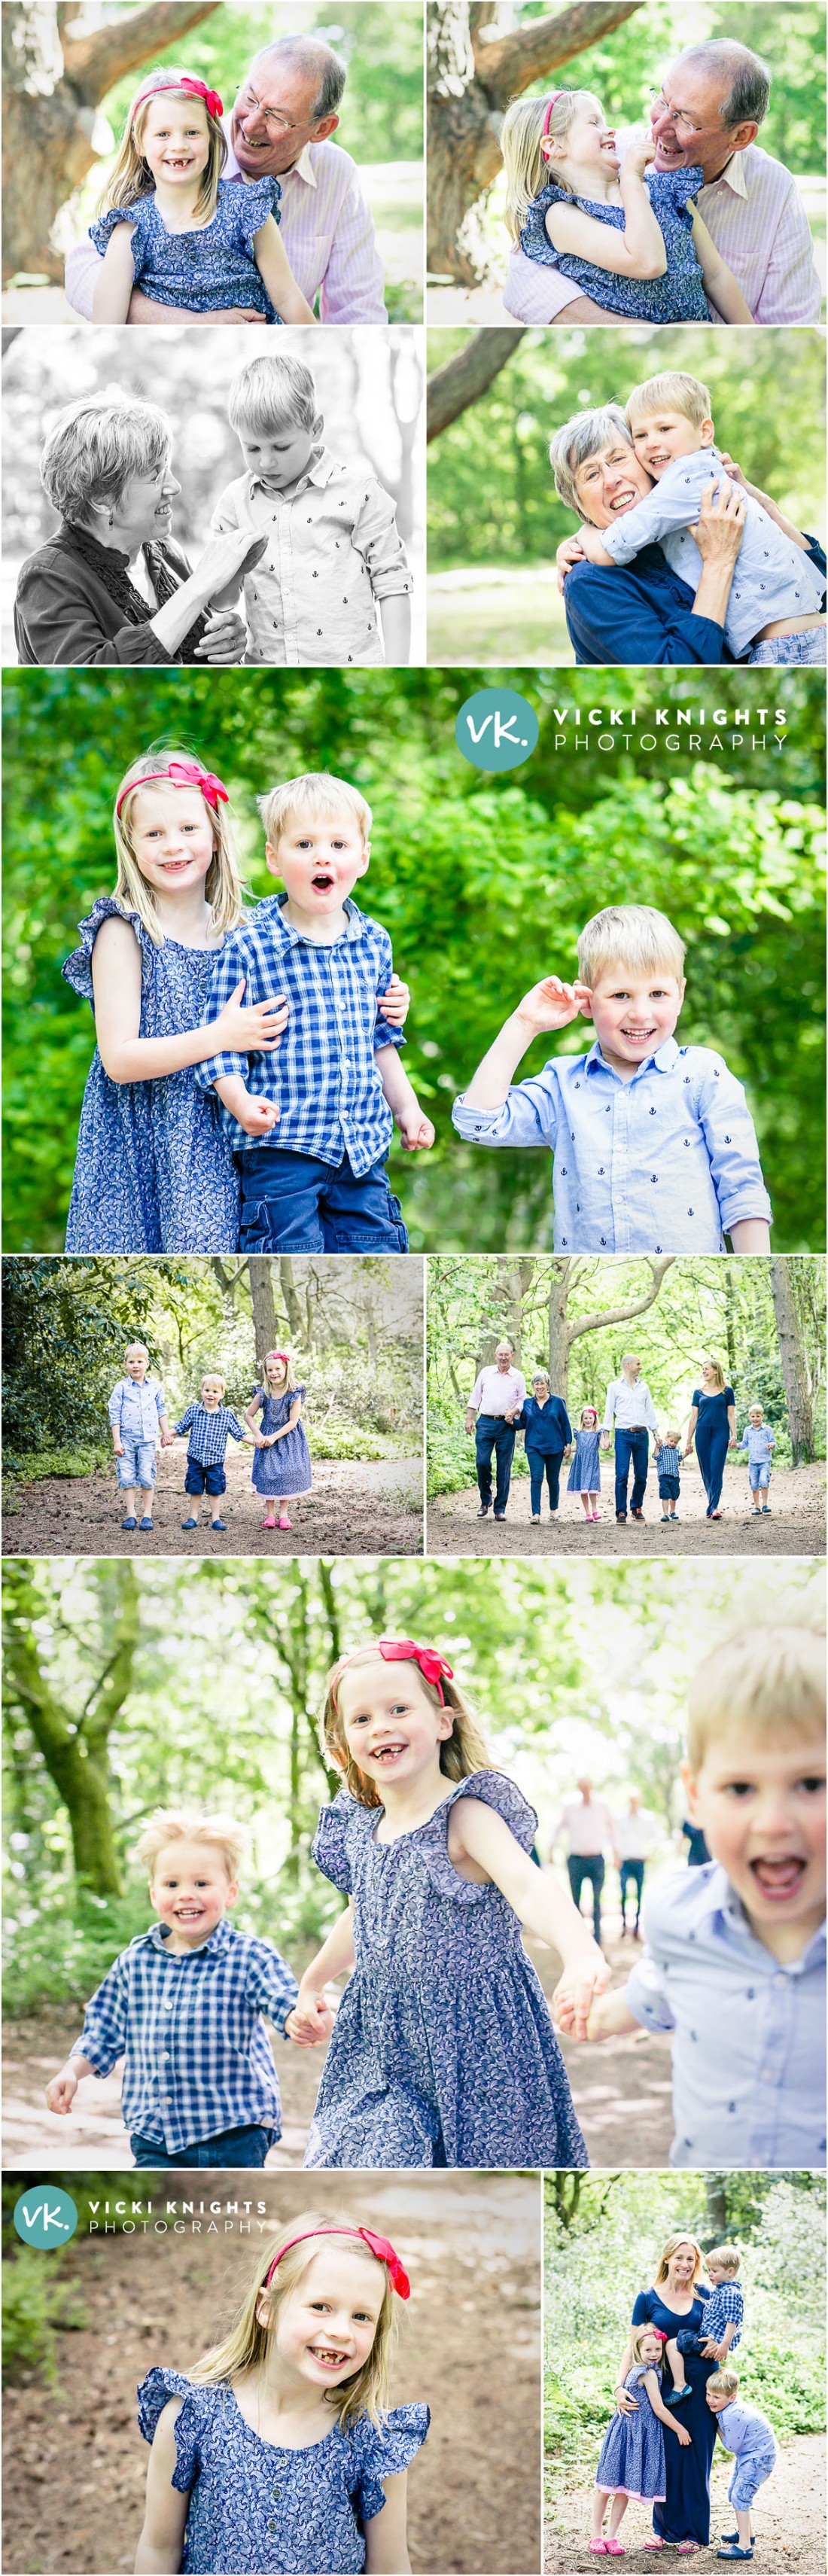 haslemere-family-photographer-vicki-knights